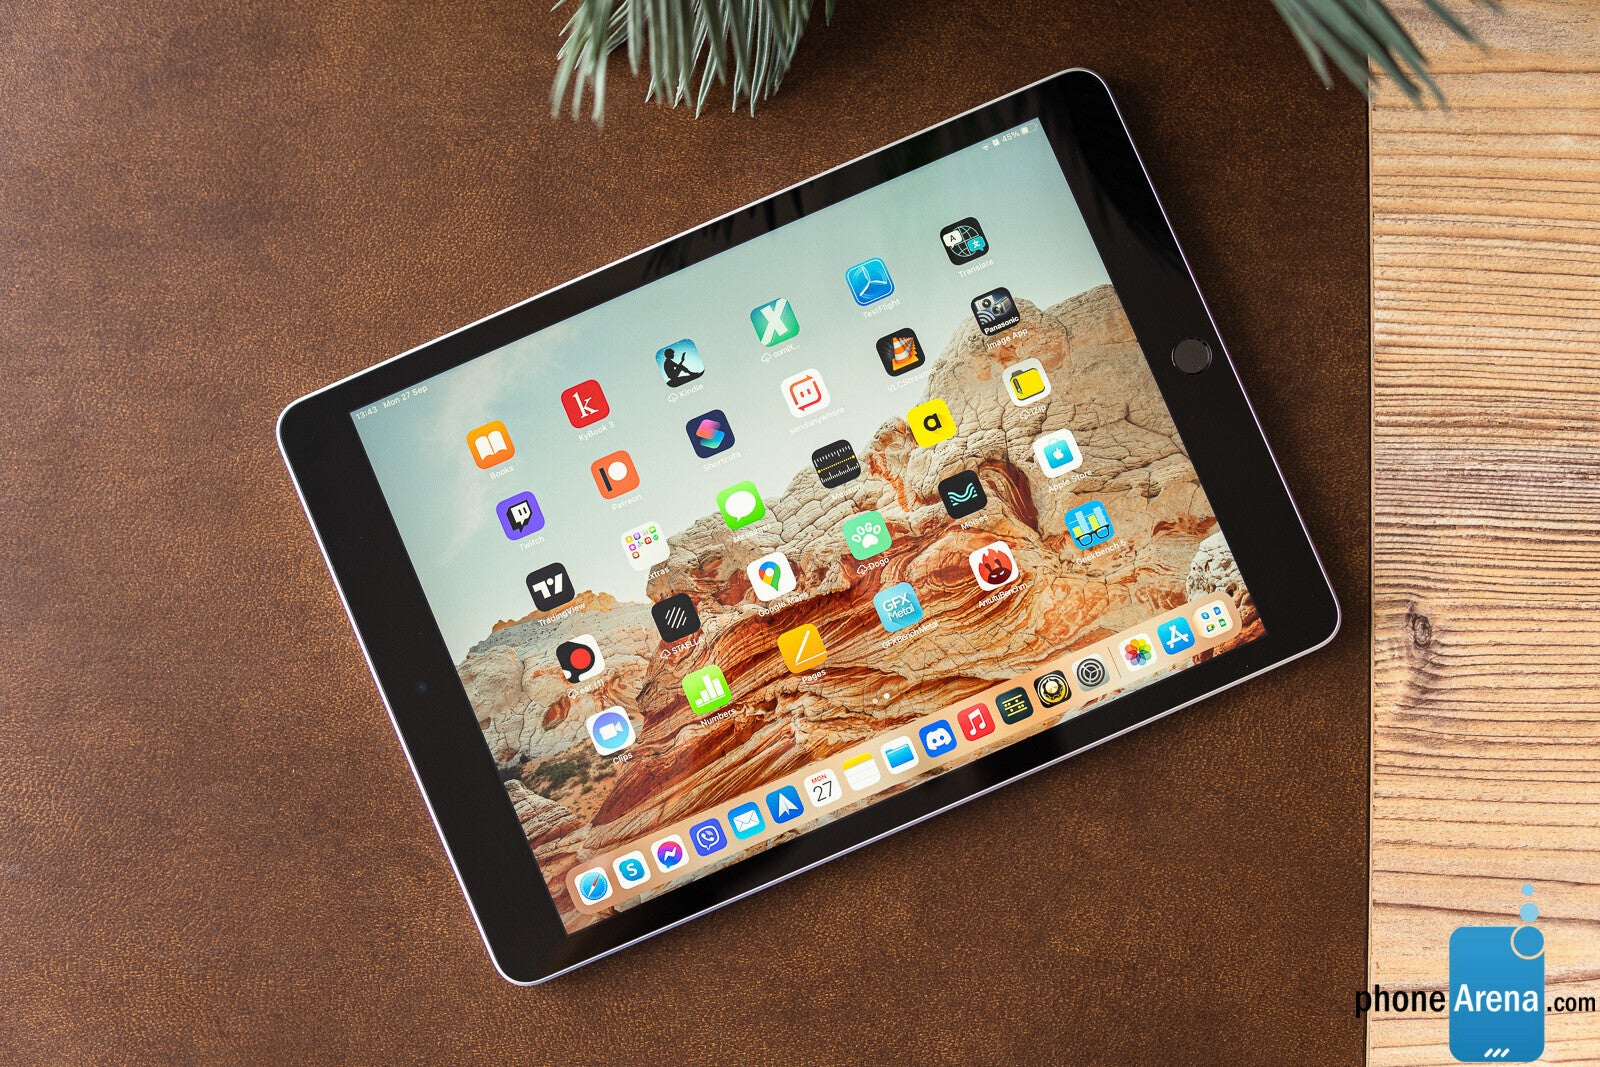 The budget 2021 iPad can handle any tasks you throw at it without breaking a sweat - Why Android tablets are awesome, yet I use an iPad